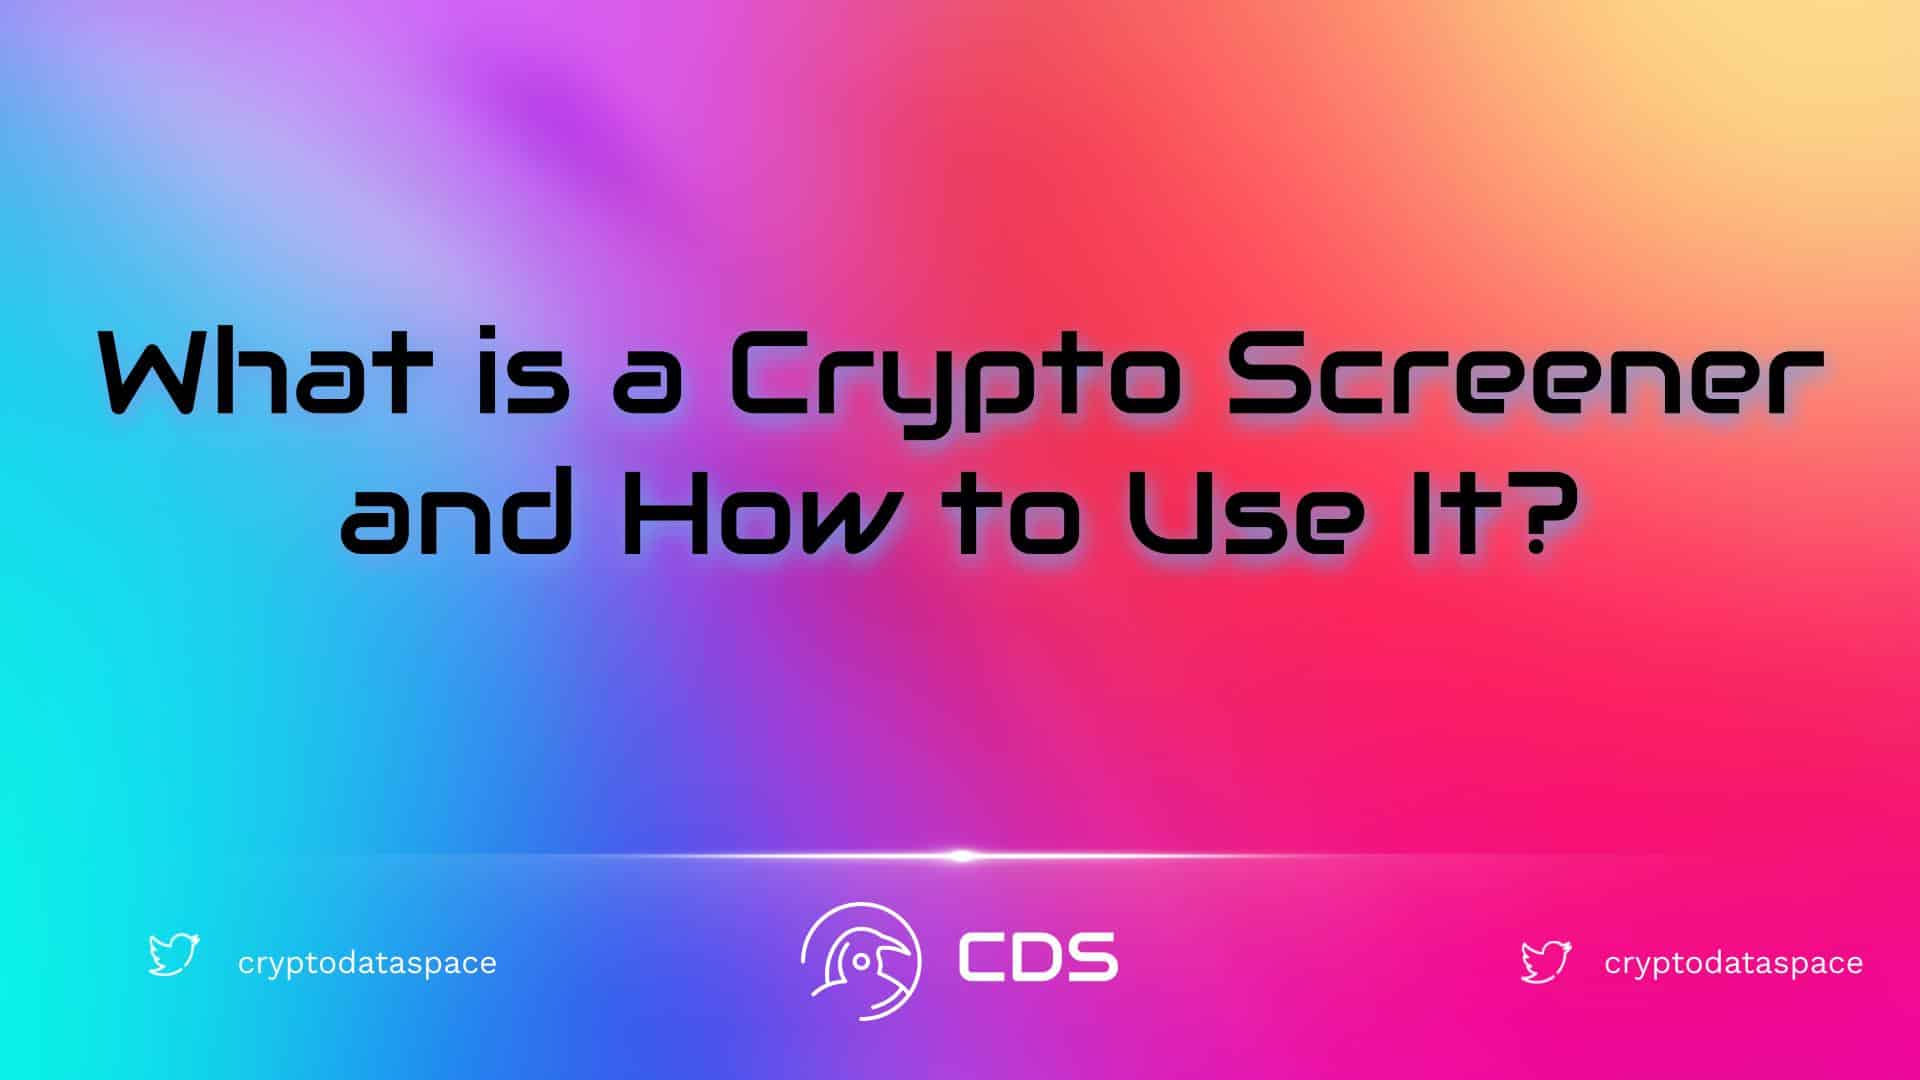 What is a Crypto Screener and How to Use It?